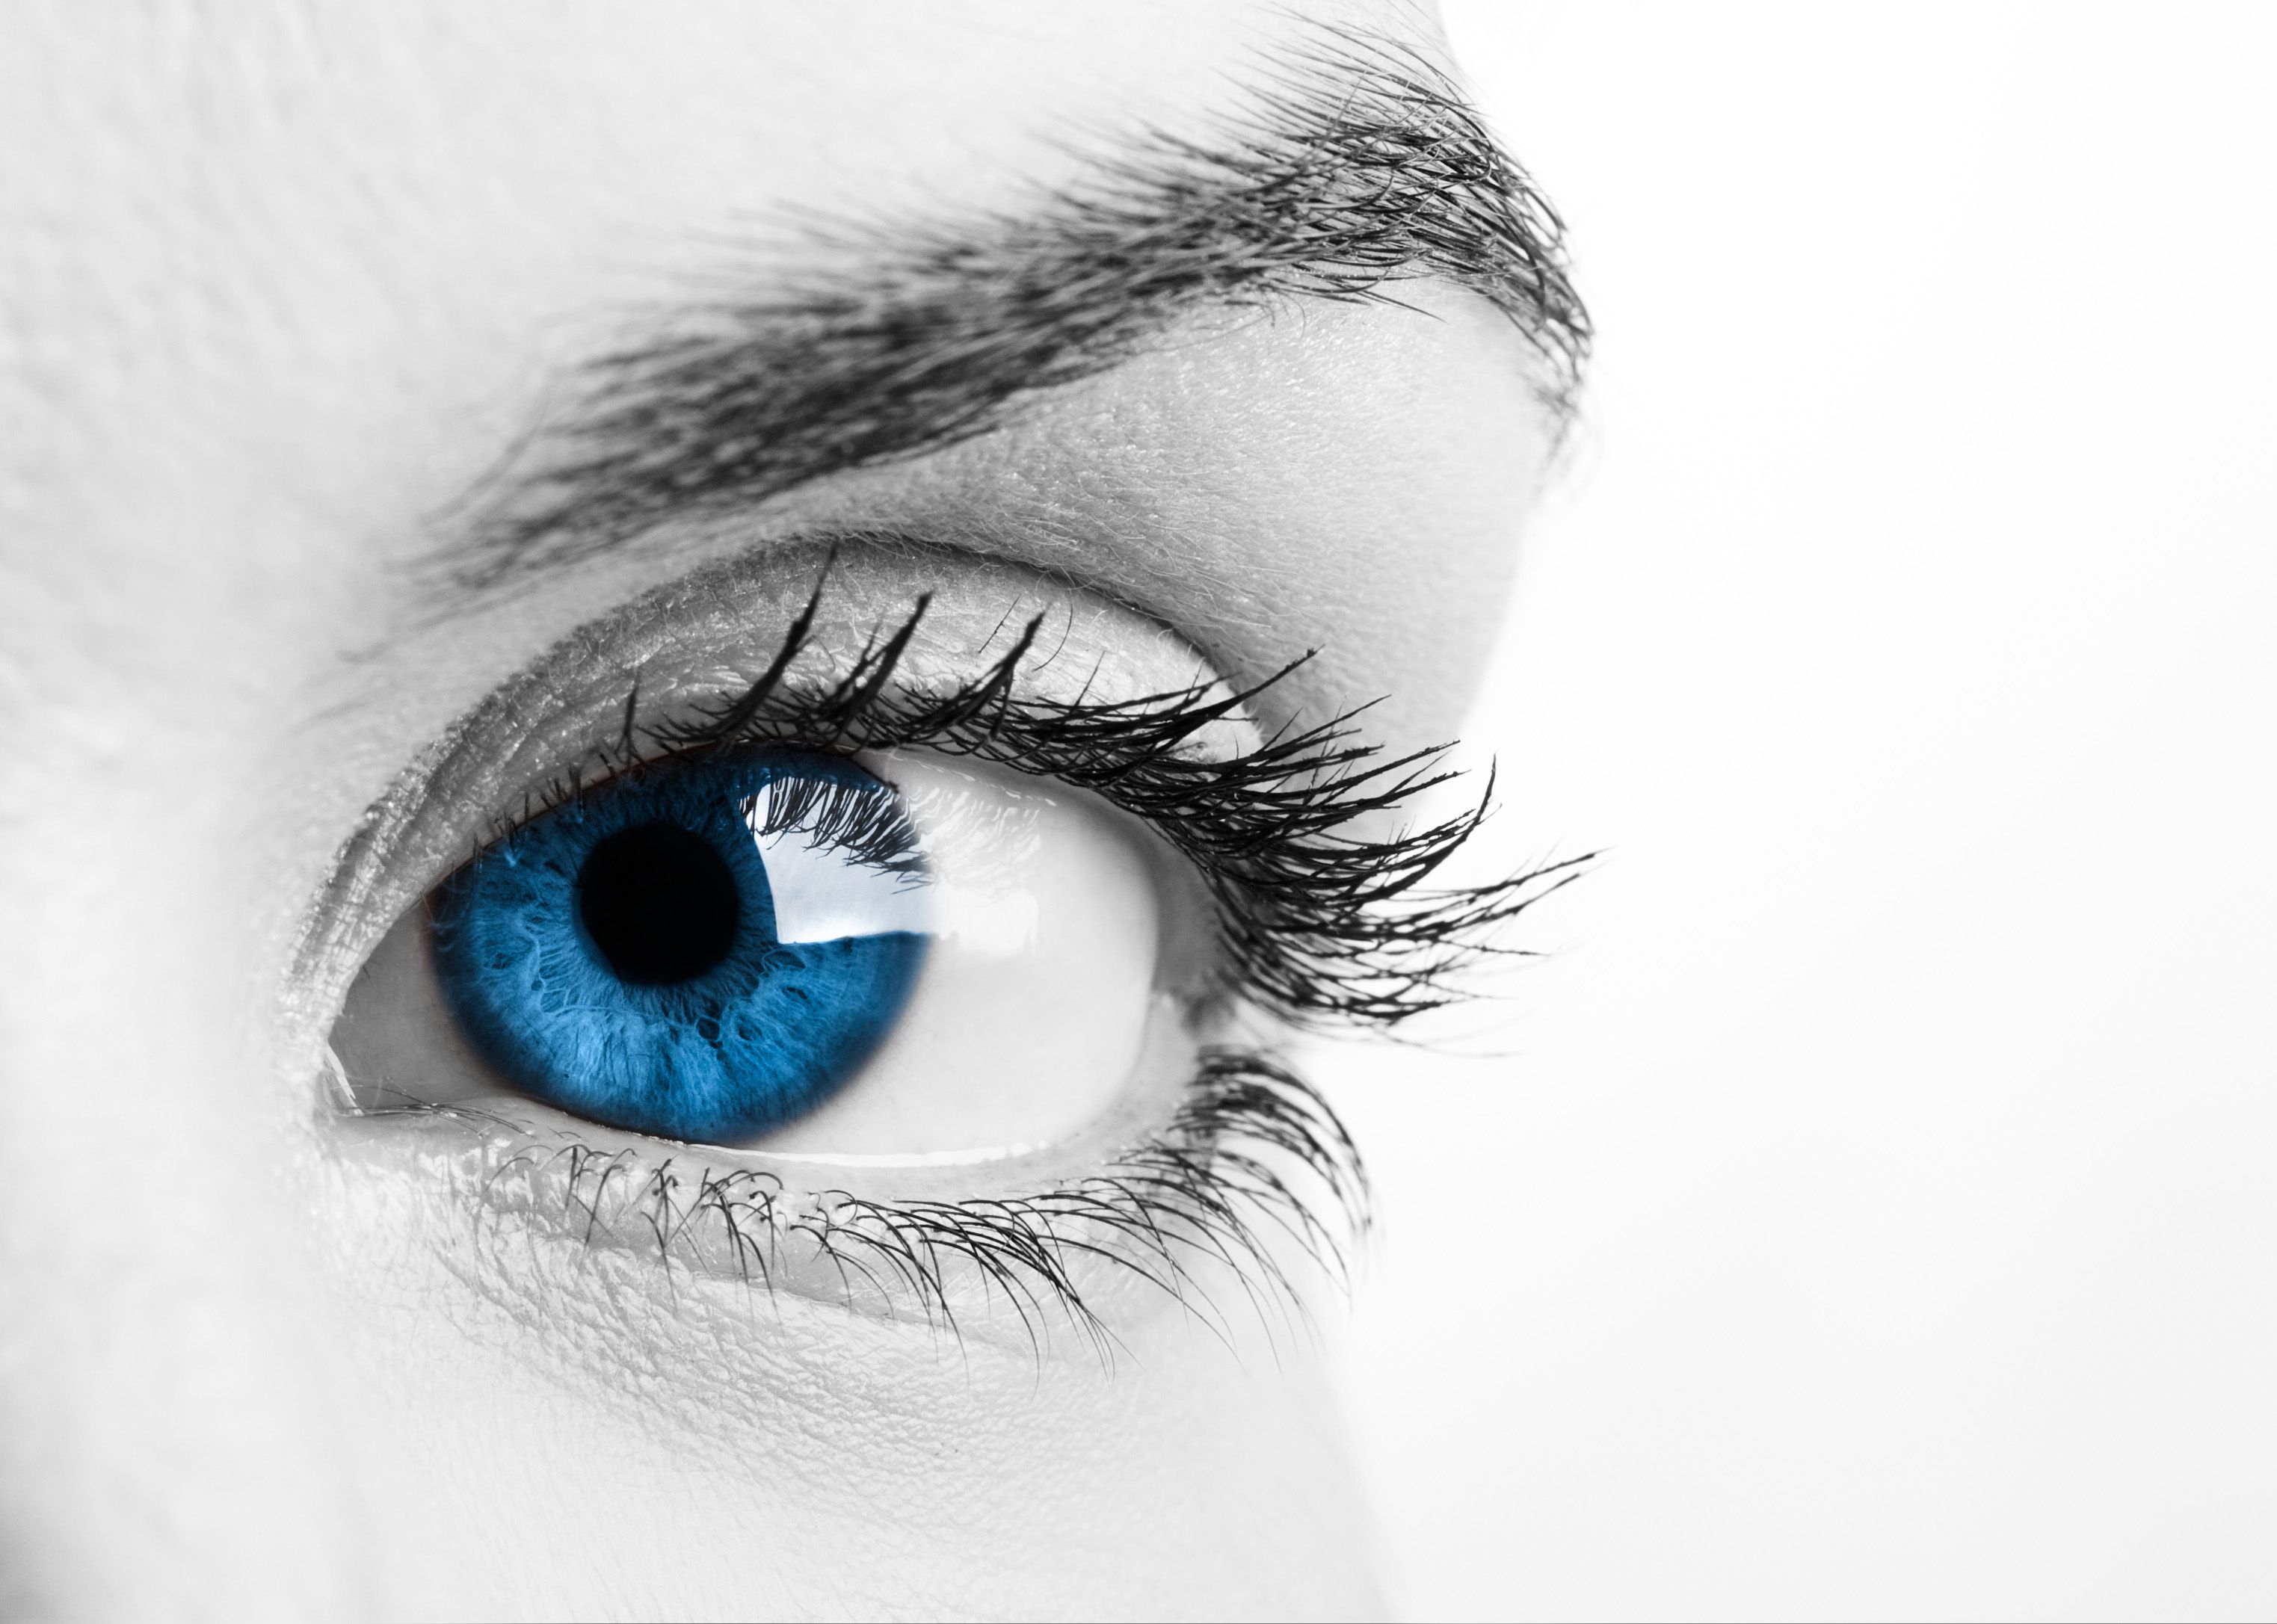 Everyone With Blue Eyes May Descend From a Single Human Ancestor